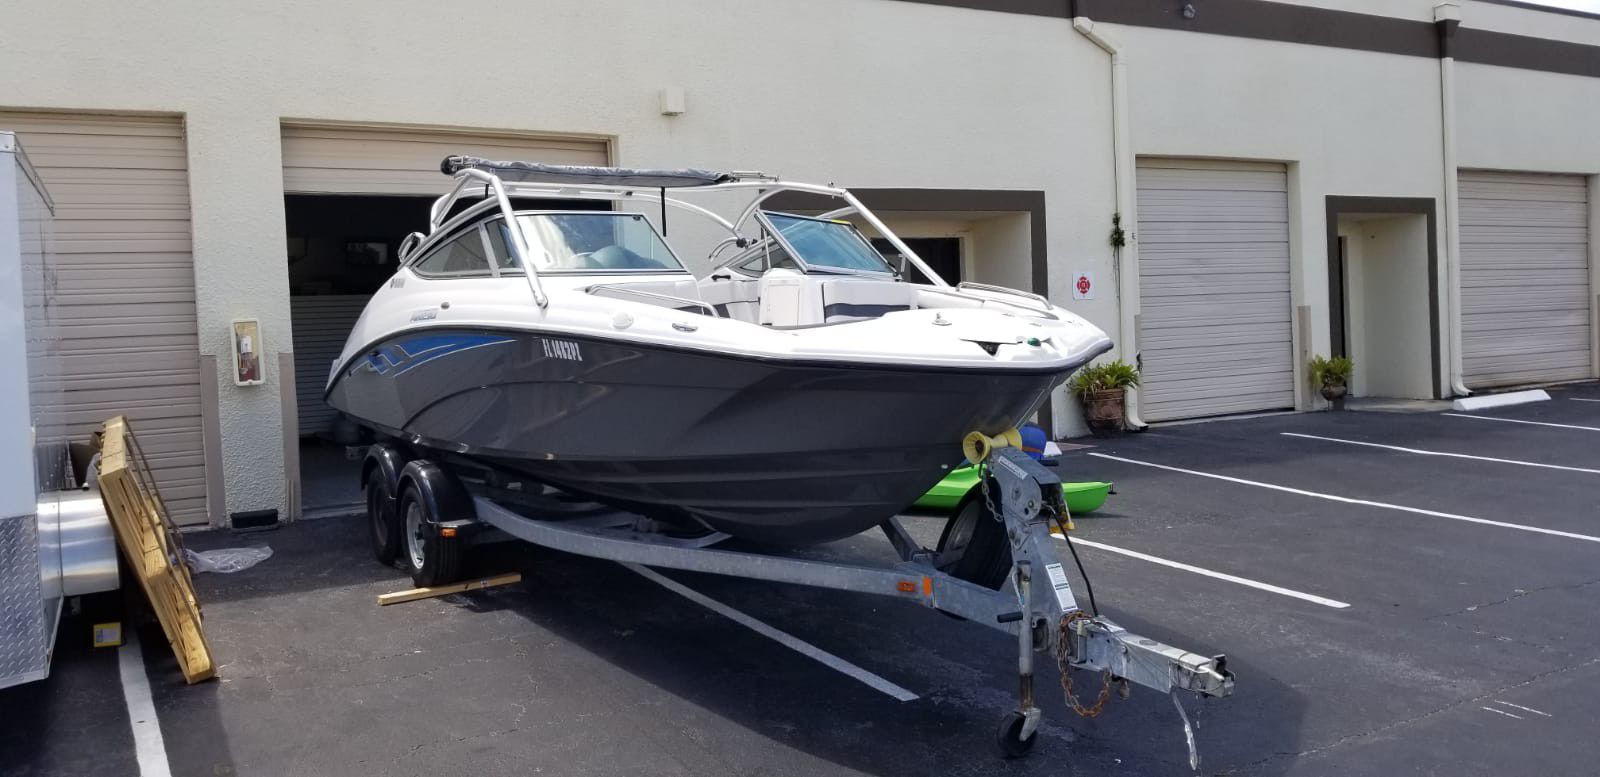 2015 Yamaha AR210 Boat (Suede Gray) Private seller